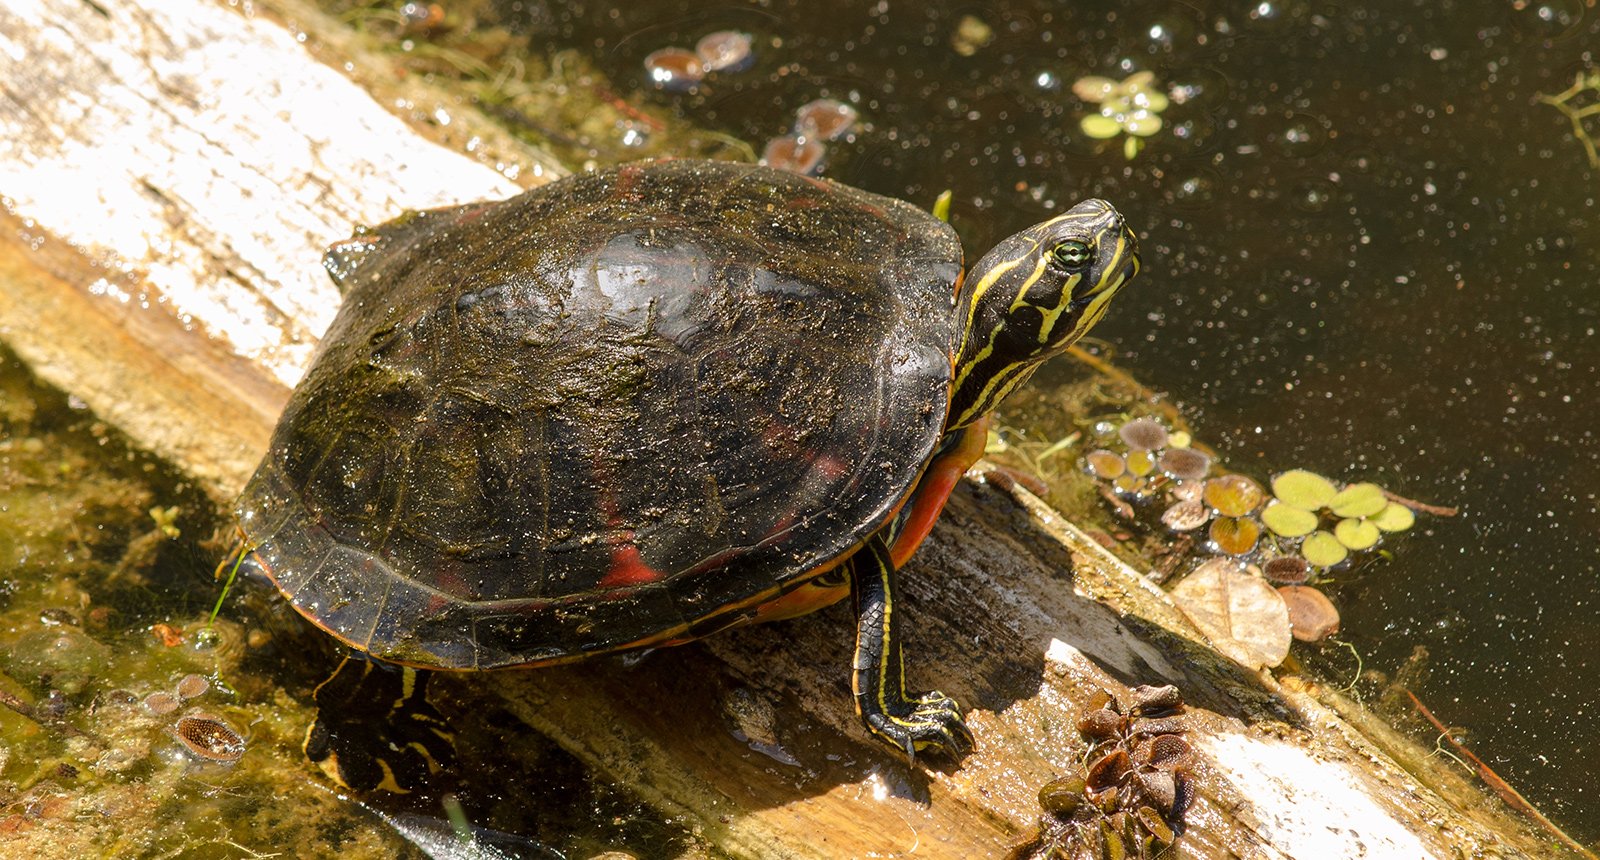 Florida red-bellied turtle - Pseudemys nelsoni